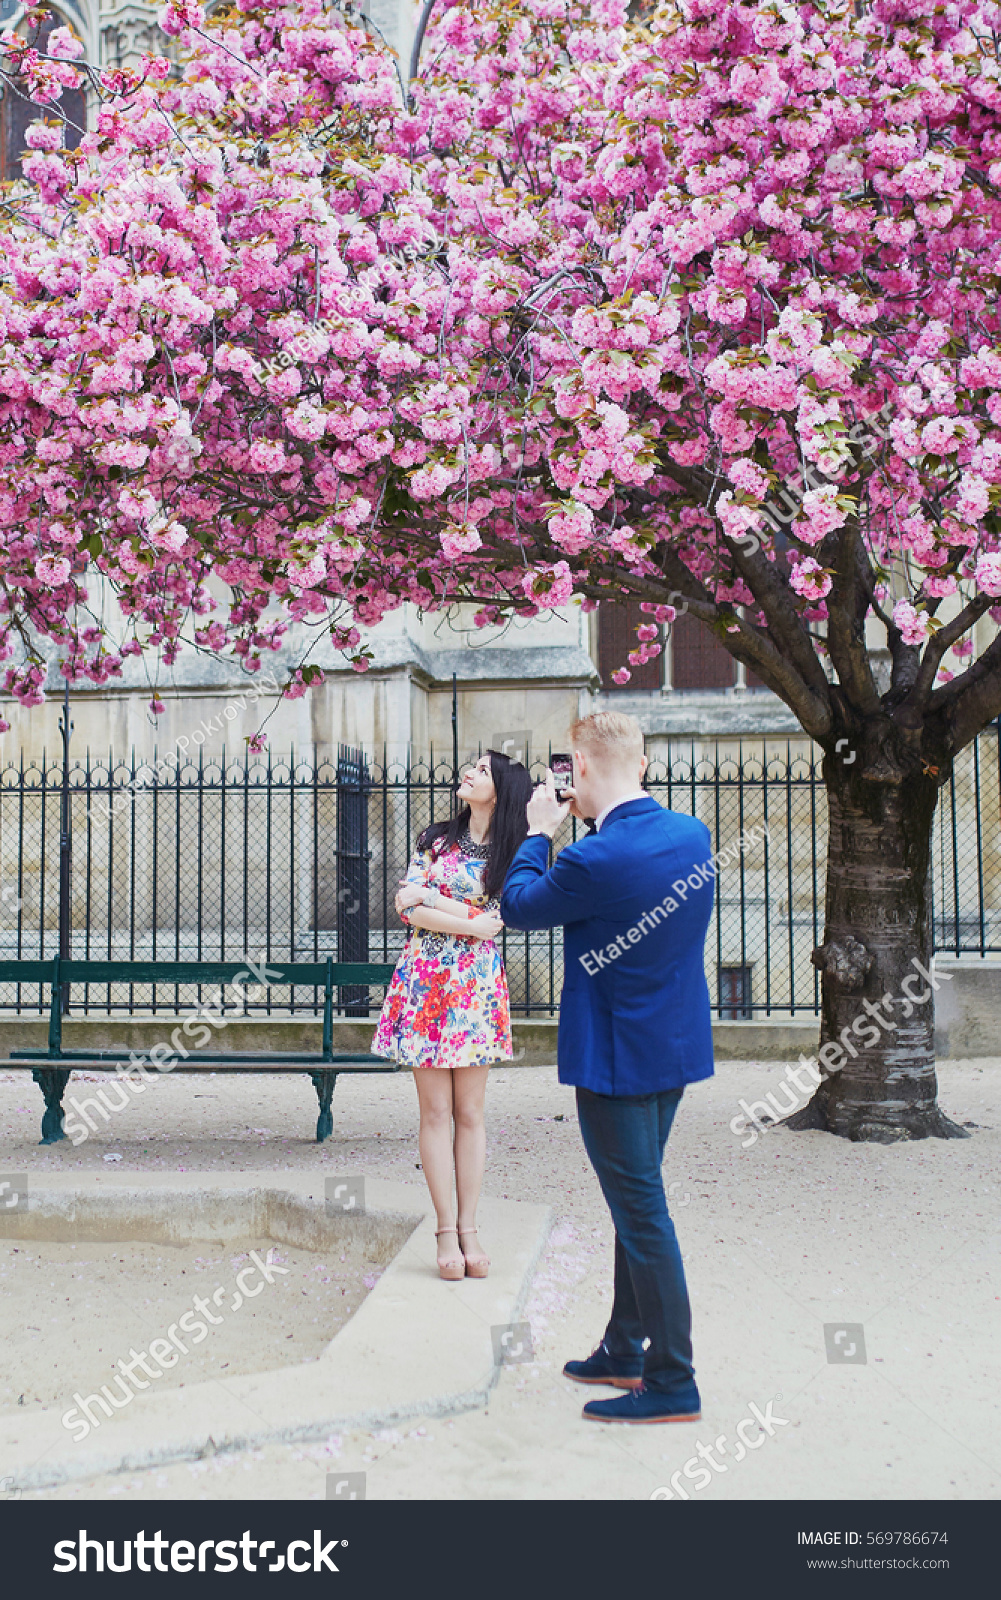 Cherry blossom dating site in Paris